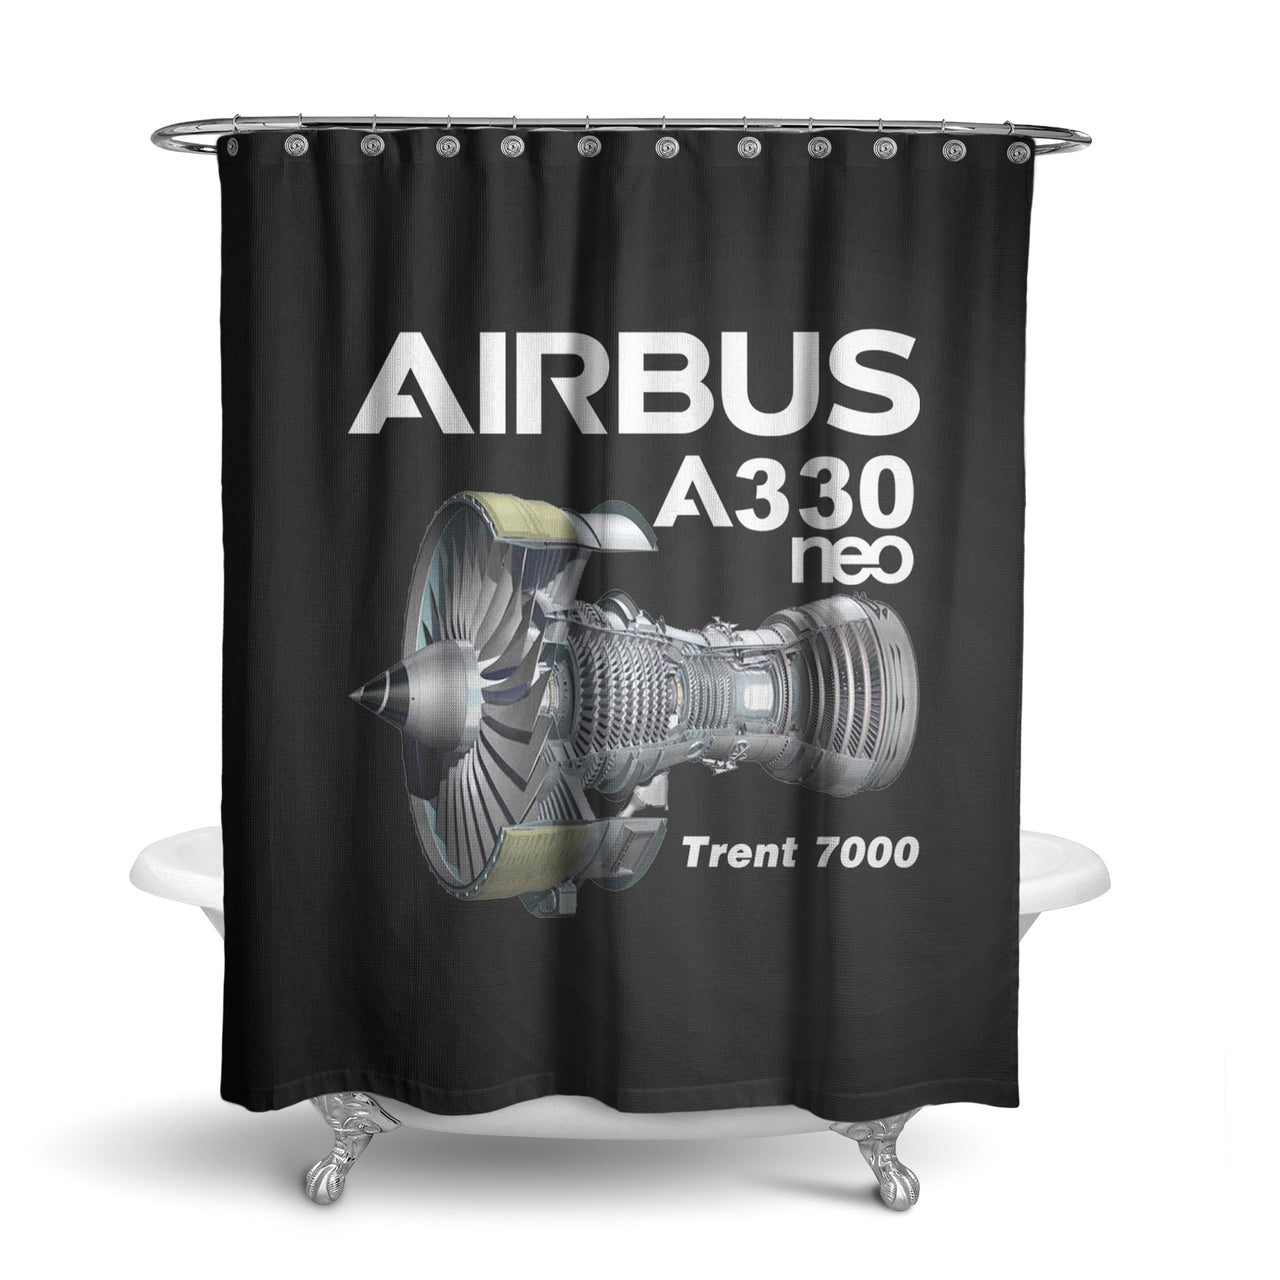 Airbus A330neo & Trent 7000 Designed Shower Curtains